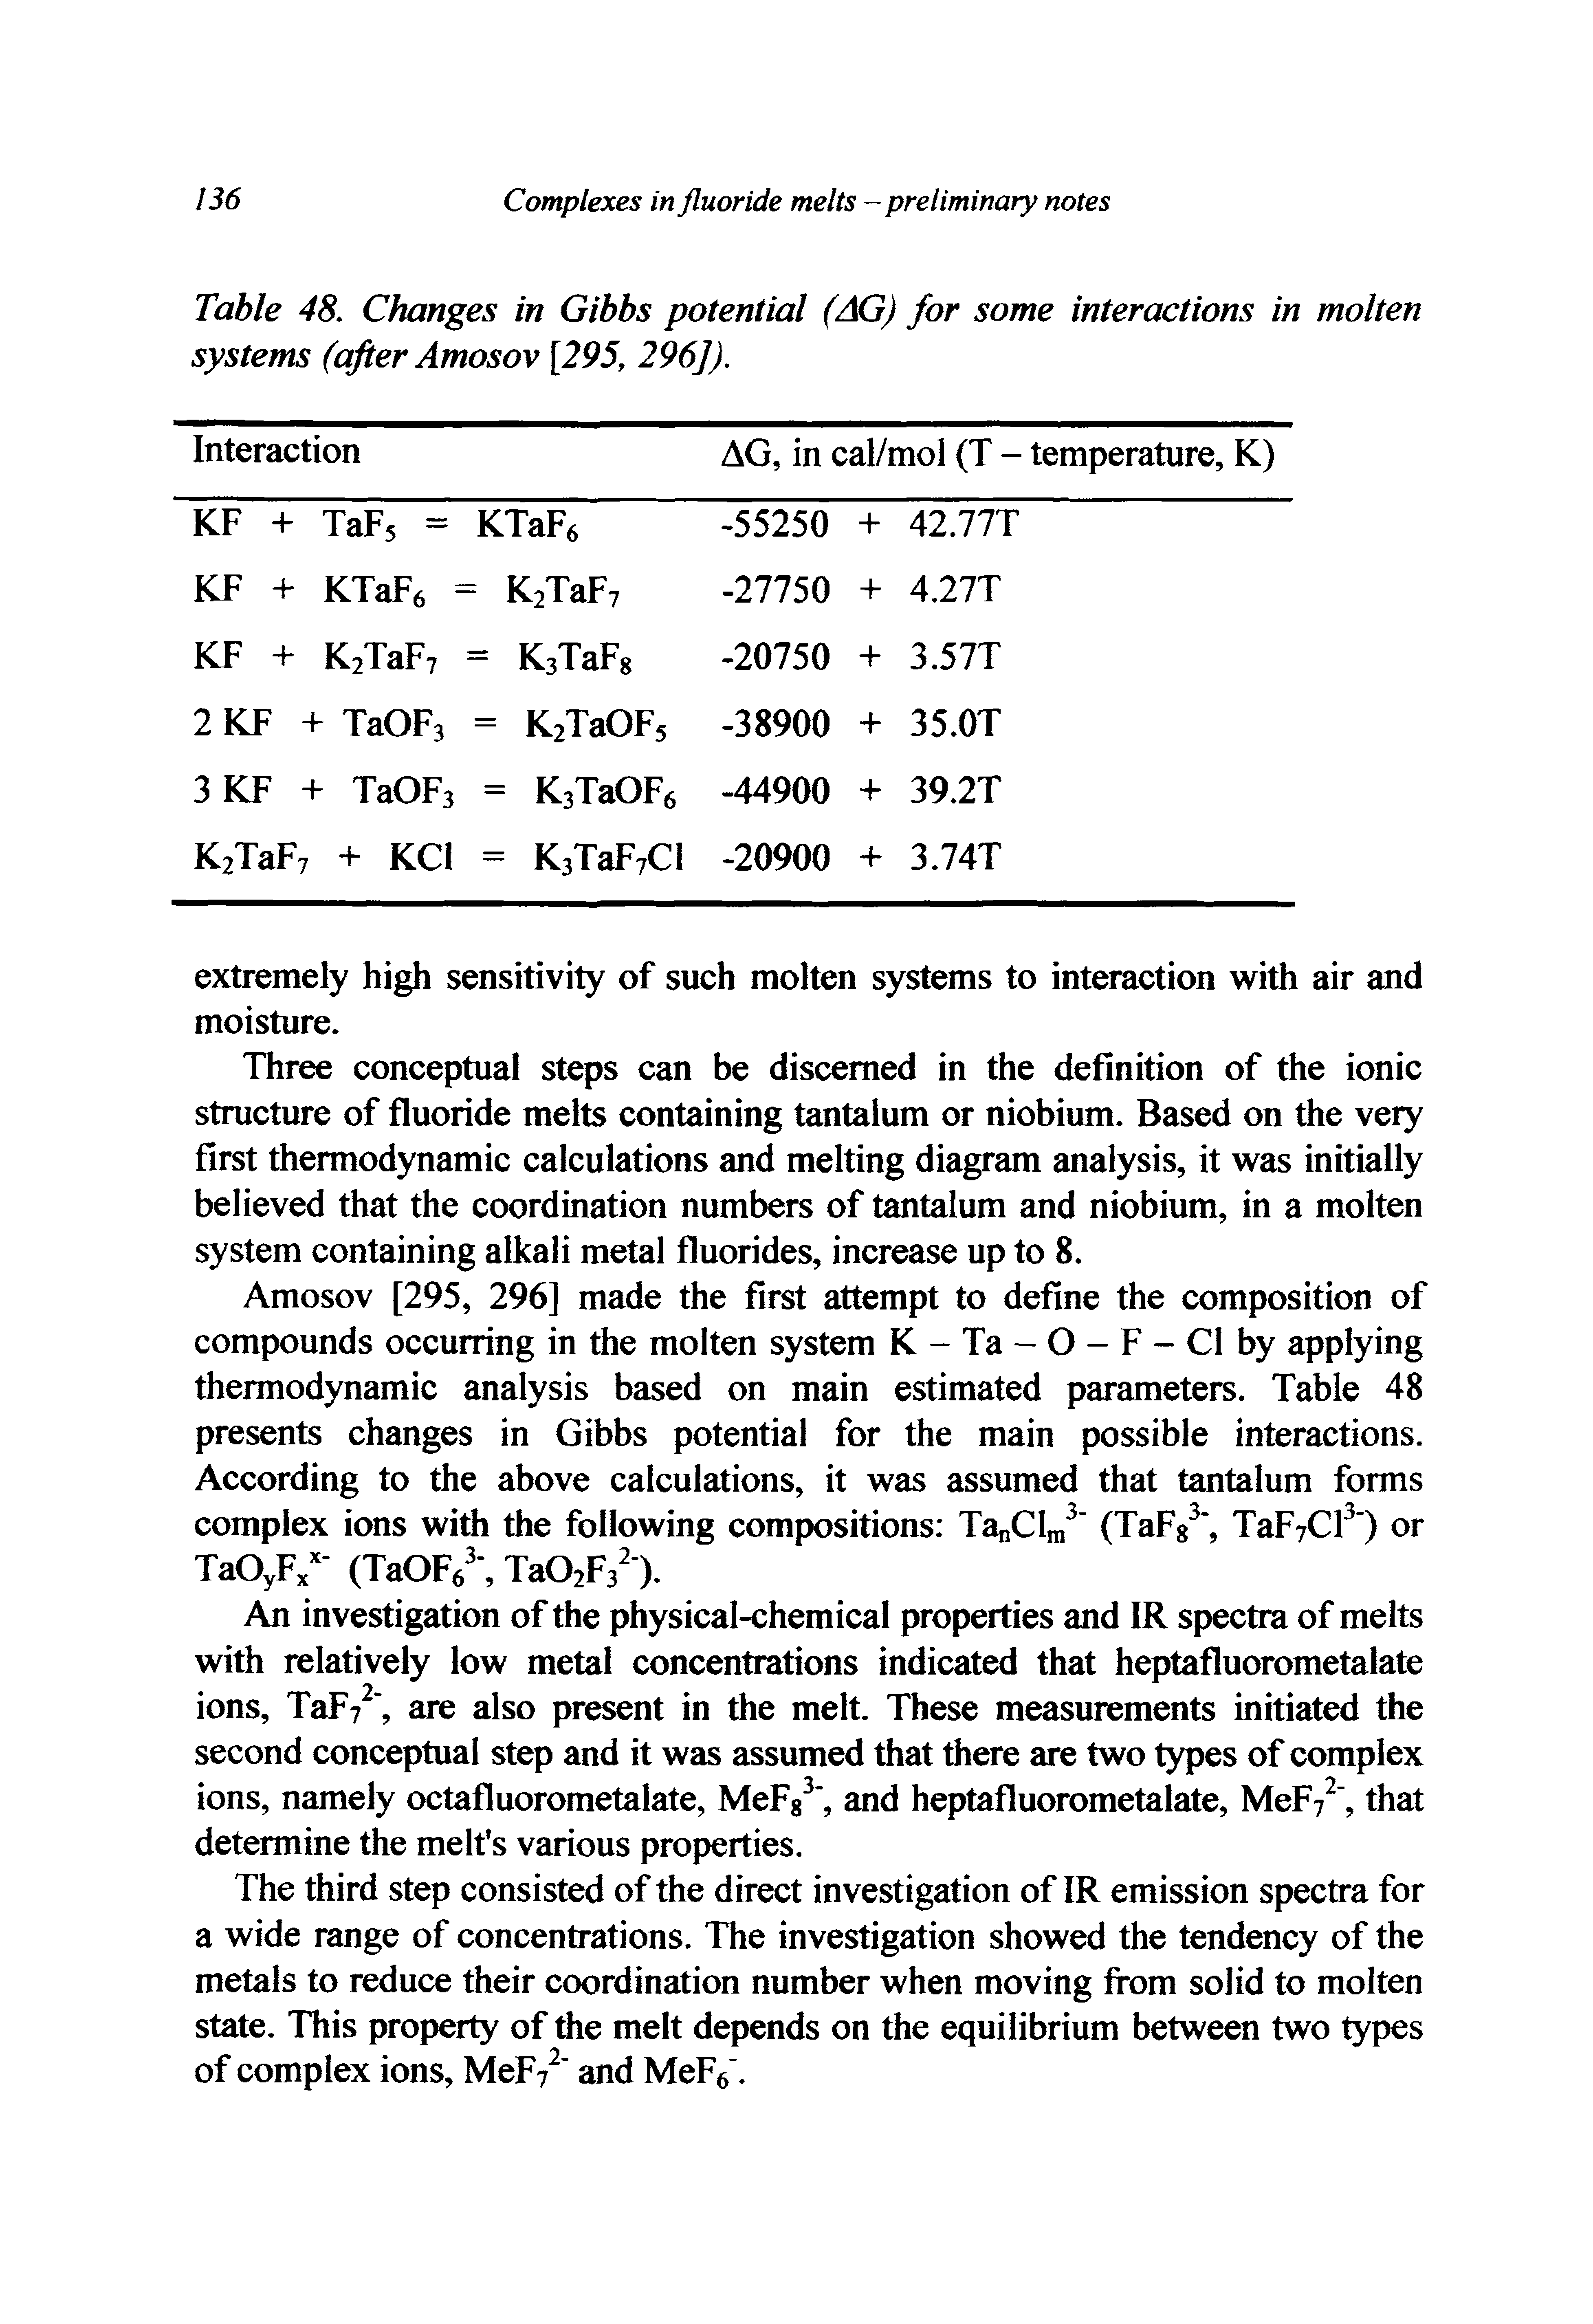 Table 48. Changes in Gibbs potential (AG) for some interactions in molten systems (after Amosov [295, 296]).